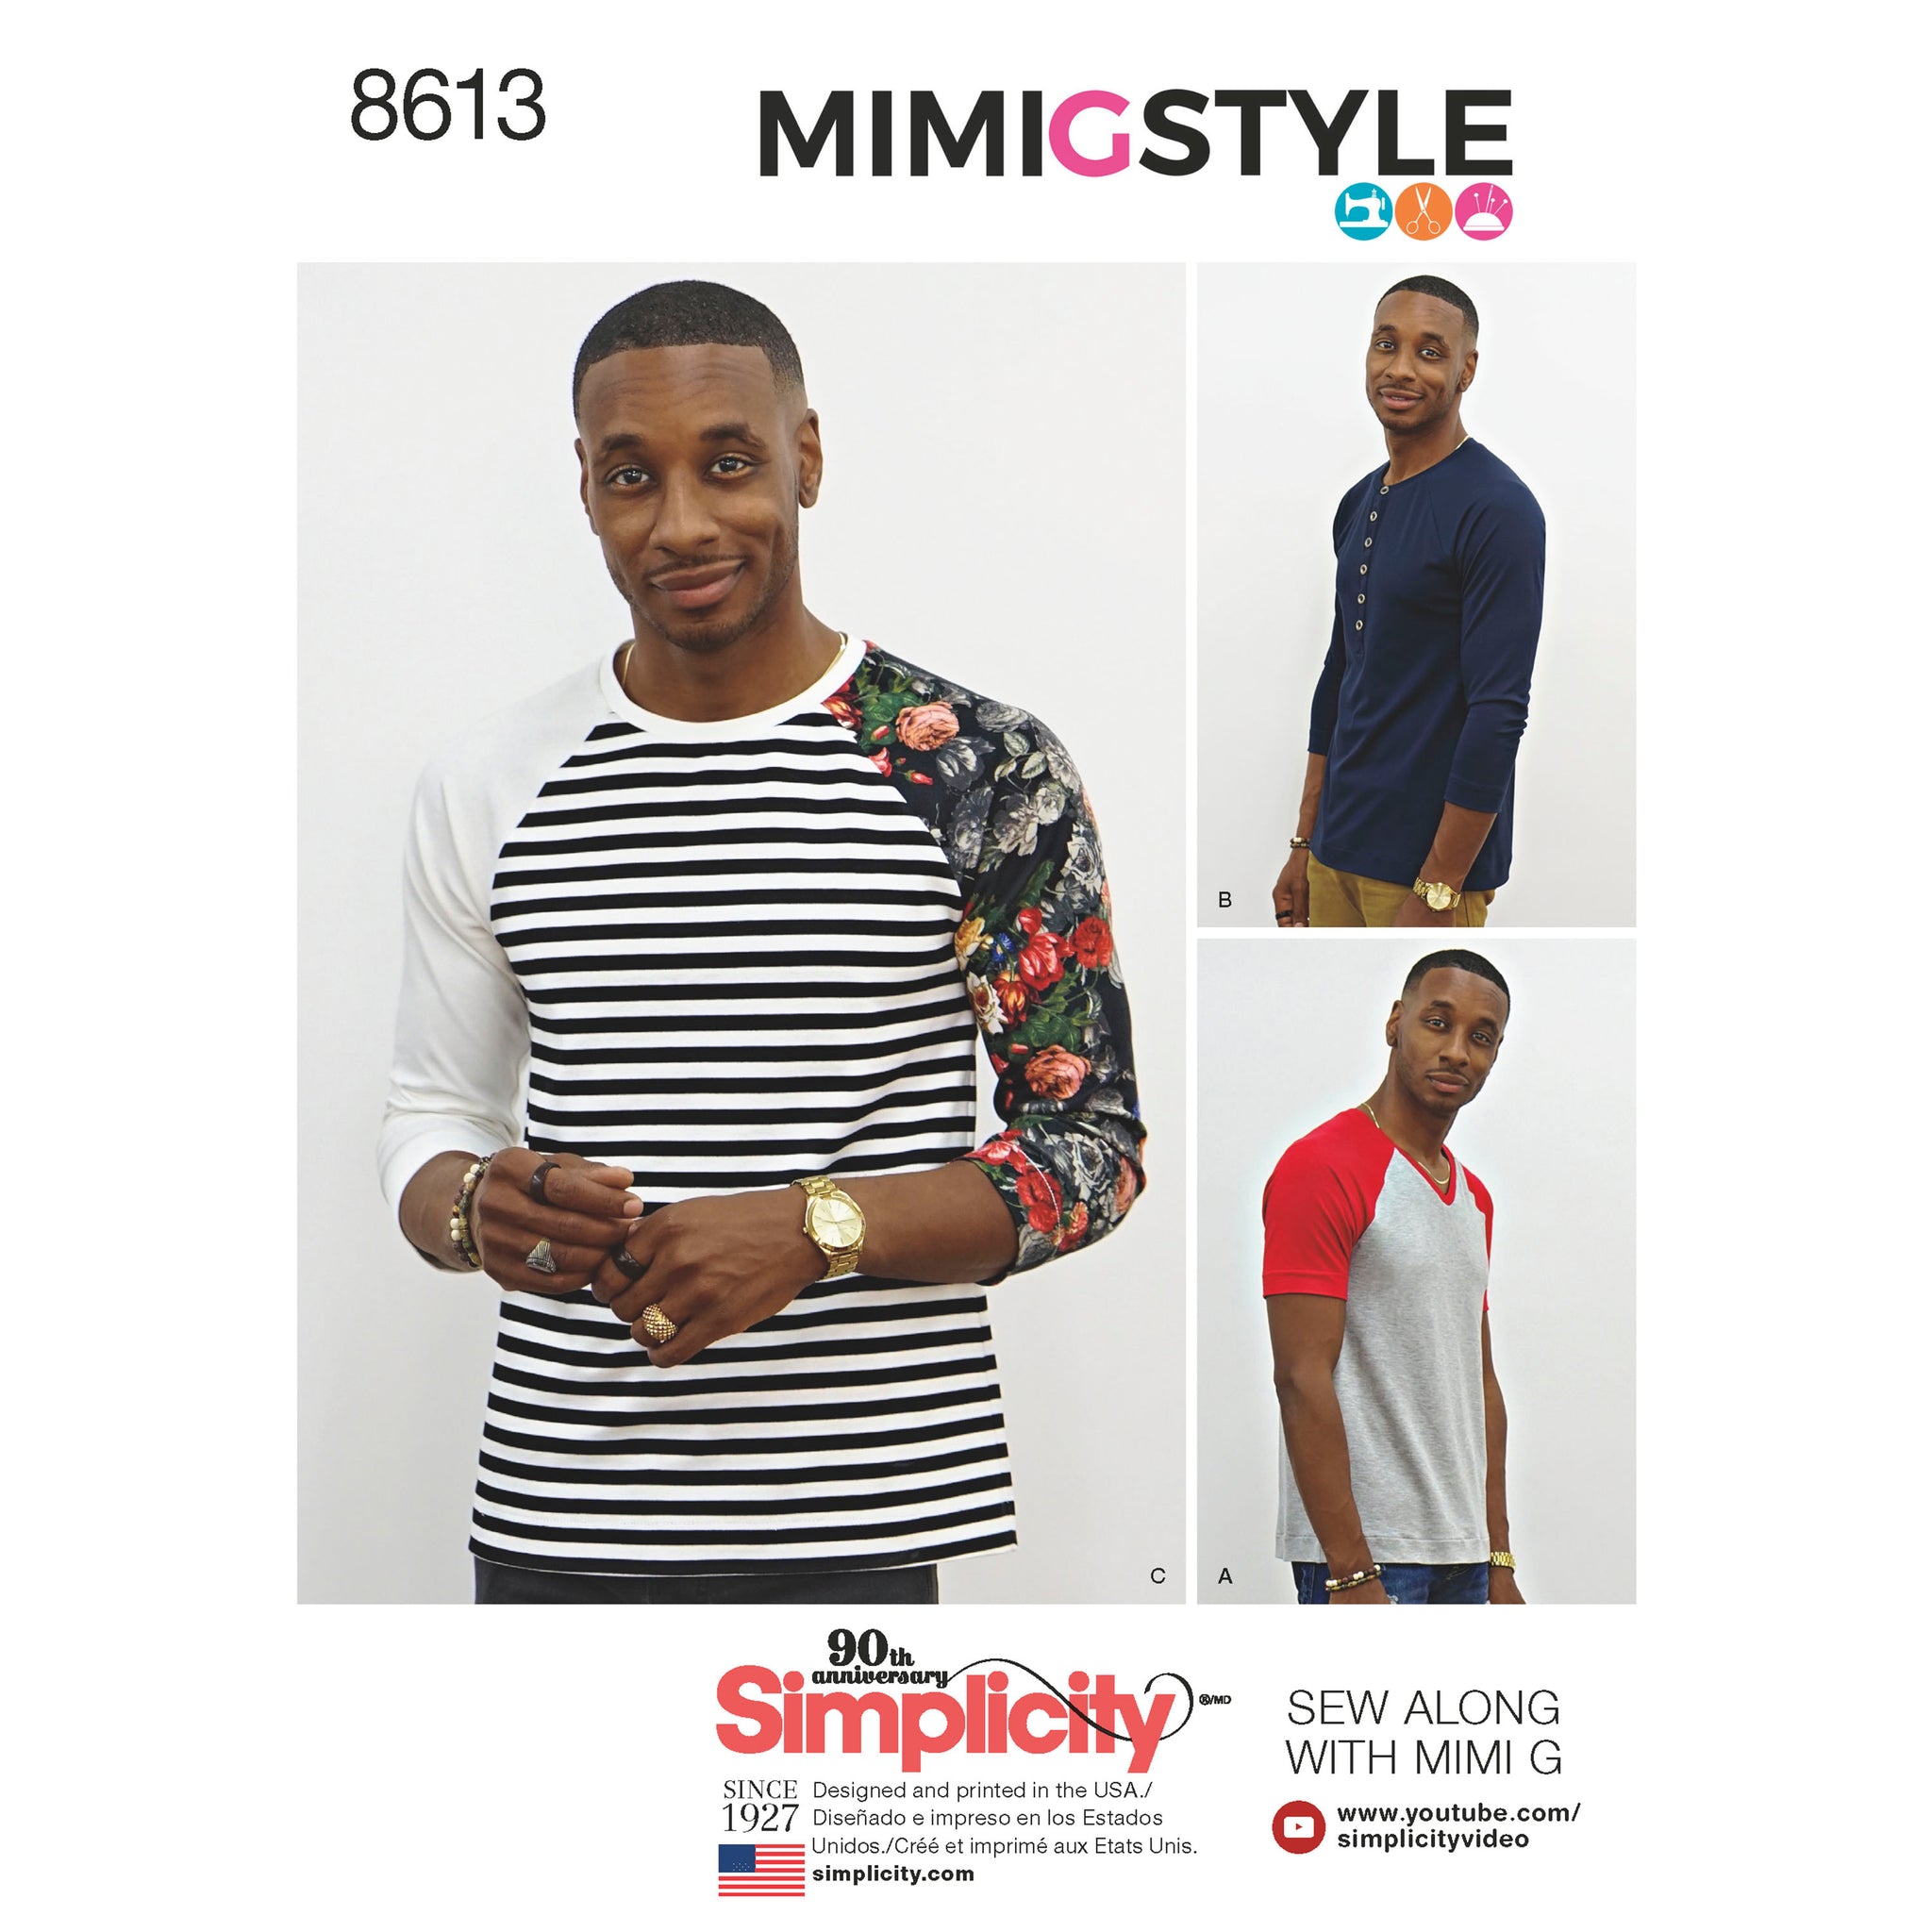 Mimi G Style Mens Lined Blazer Simplicity Sewing Pattern 8962